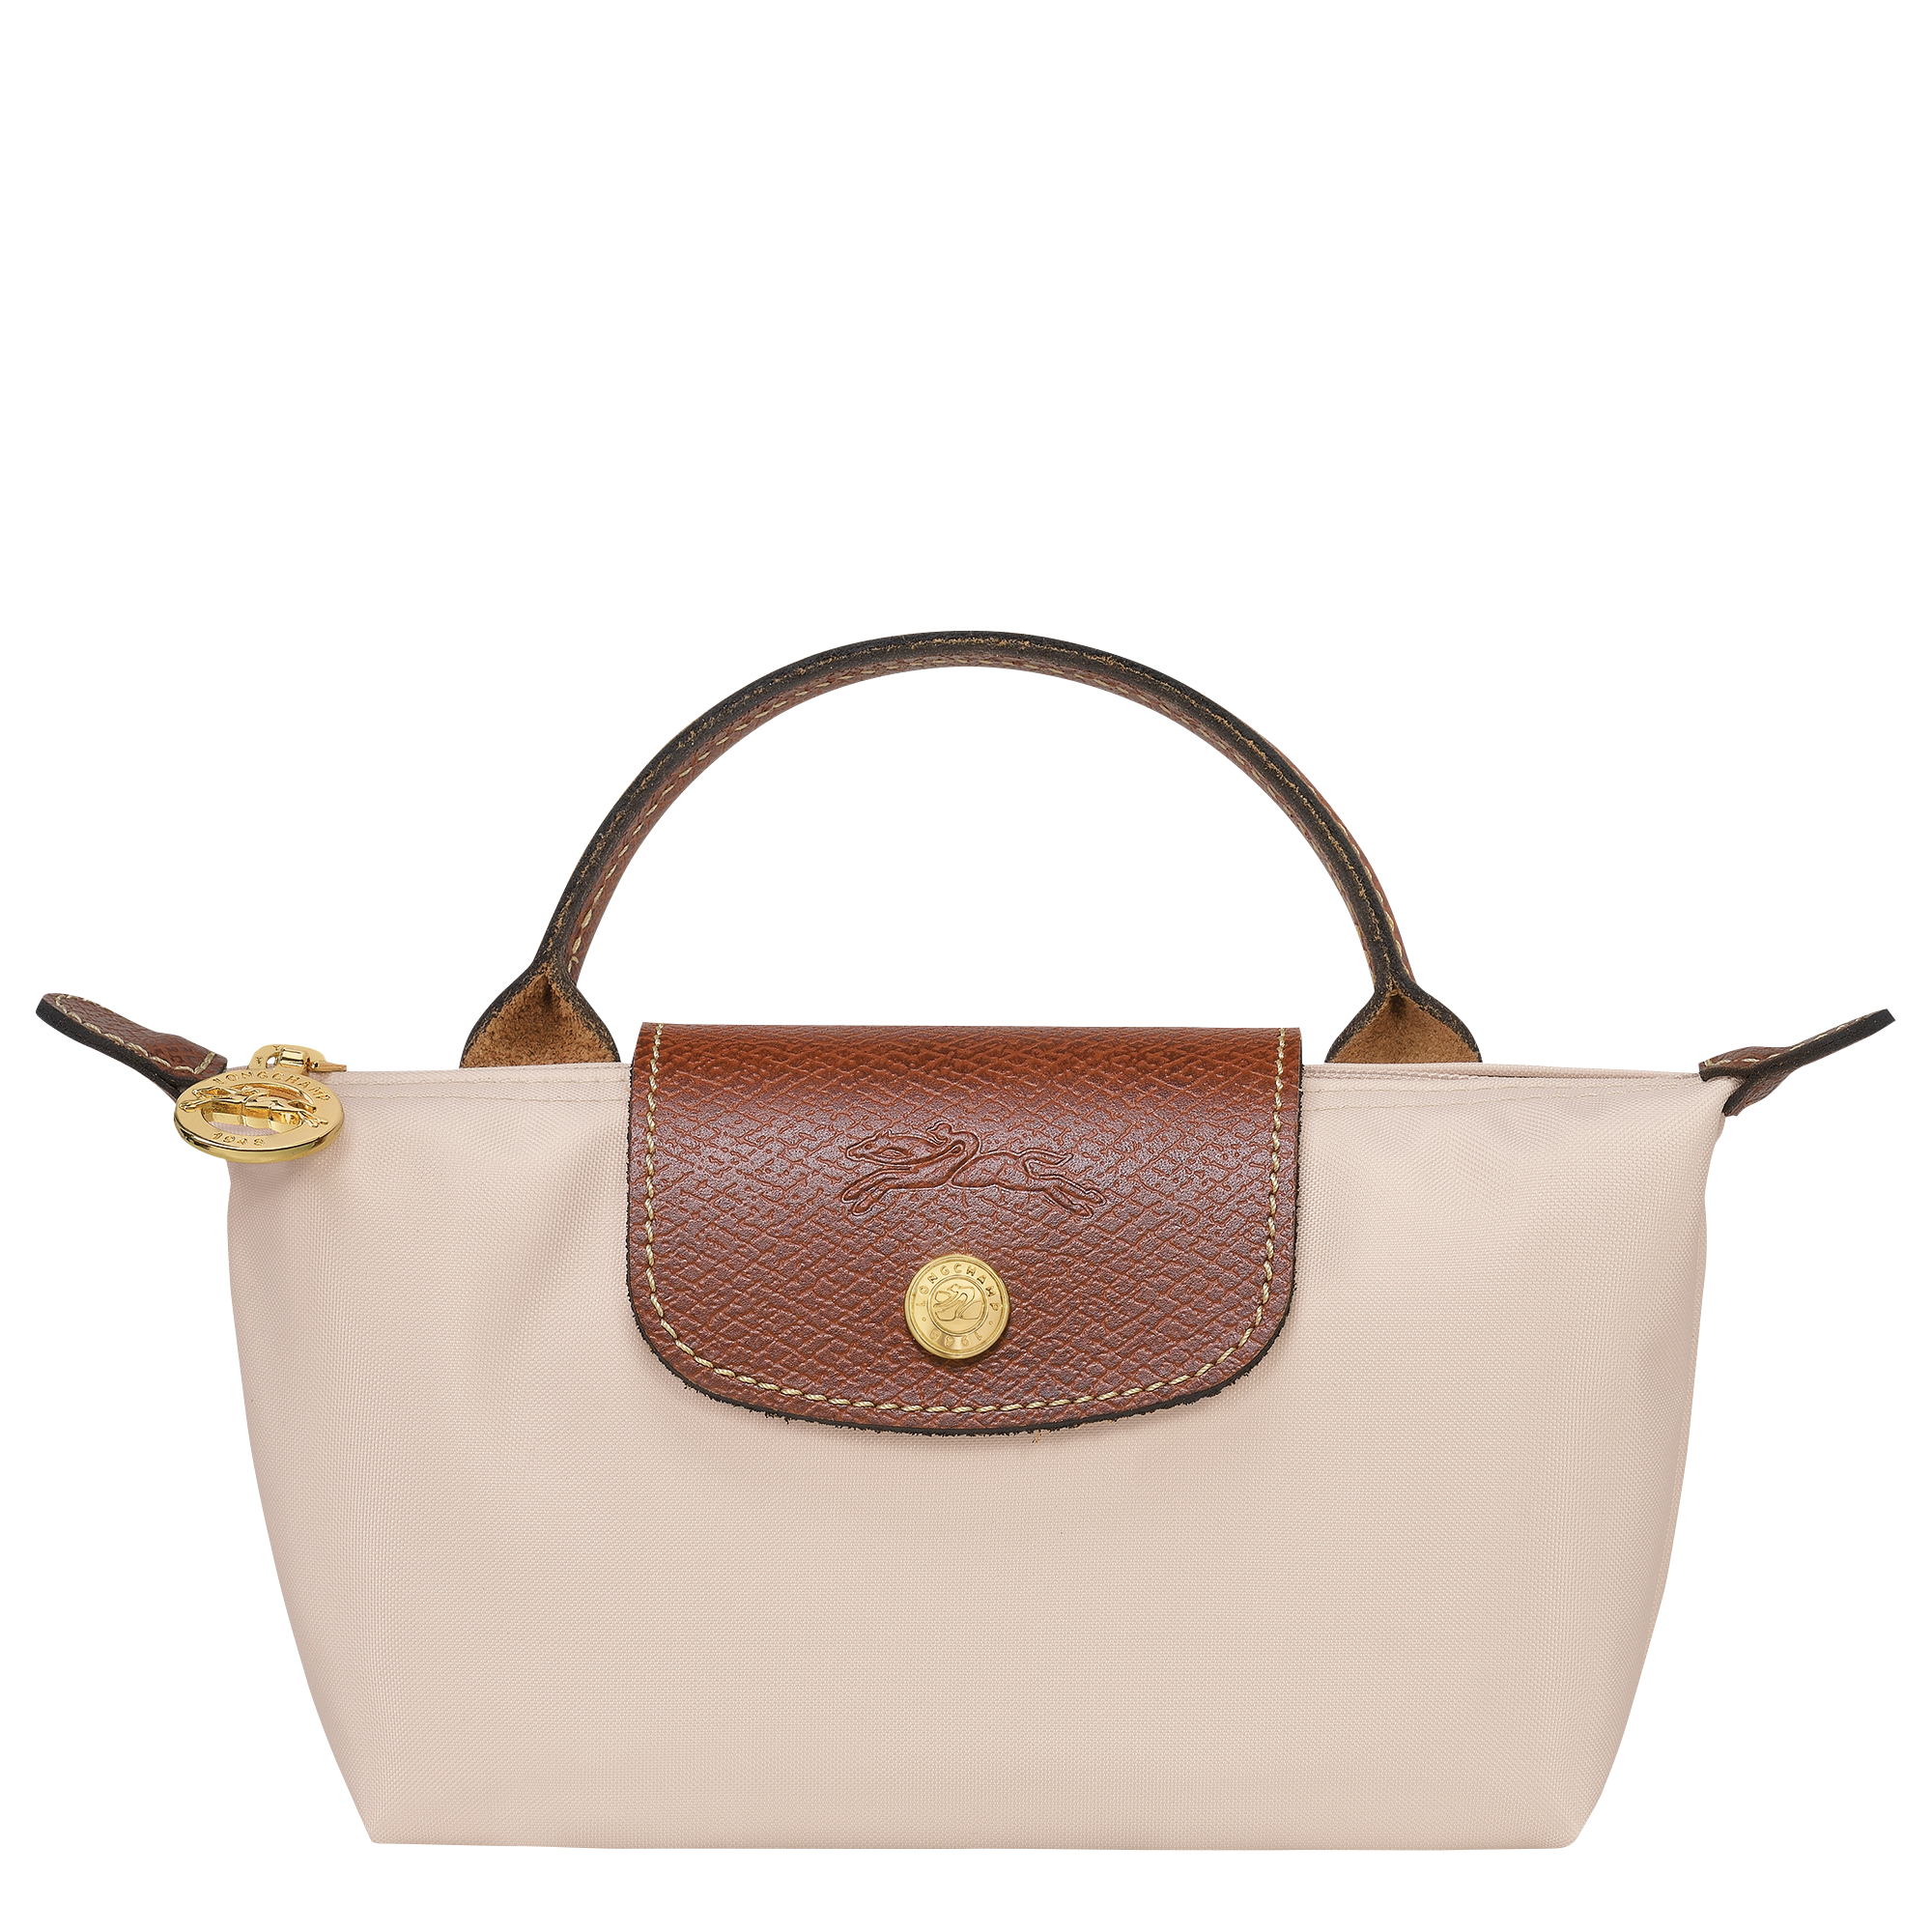 Kate Middleton's Timeless Longchamp Tote Bag Is on Sale